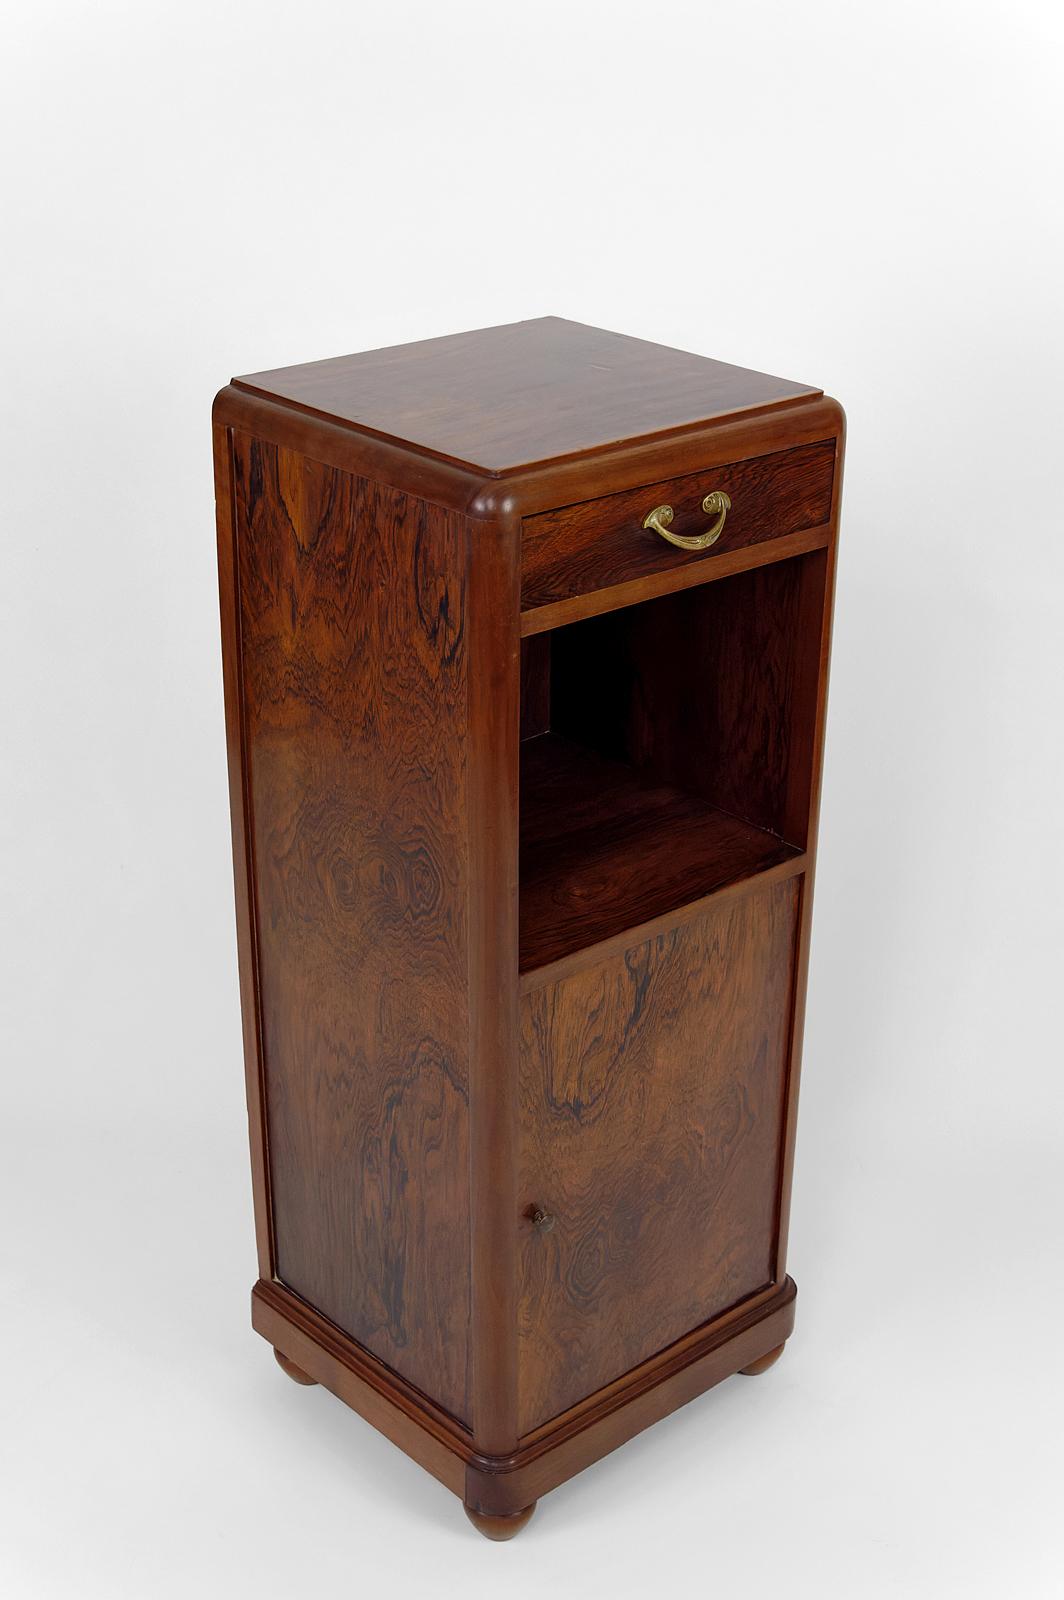 Rosewood / mahogany nightstand / bedside table and bronze handle.
Composed of a drawer, a niche and a storage cupboard.

Art Nouveau, France, circa 1910-1920.
By Ateliers Louis Majorelle.

In very good condition.

Dimensions:
Height